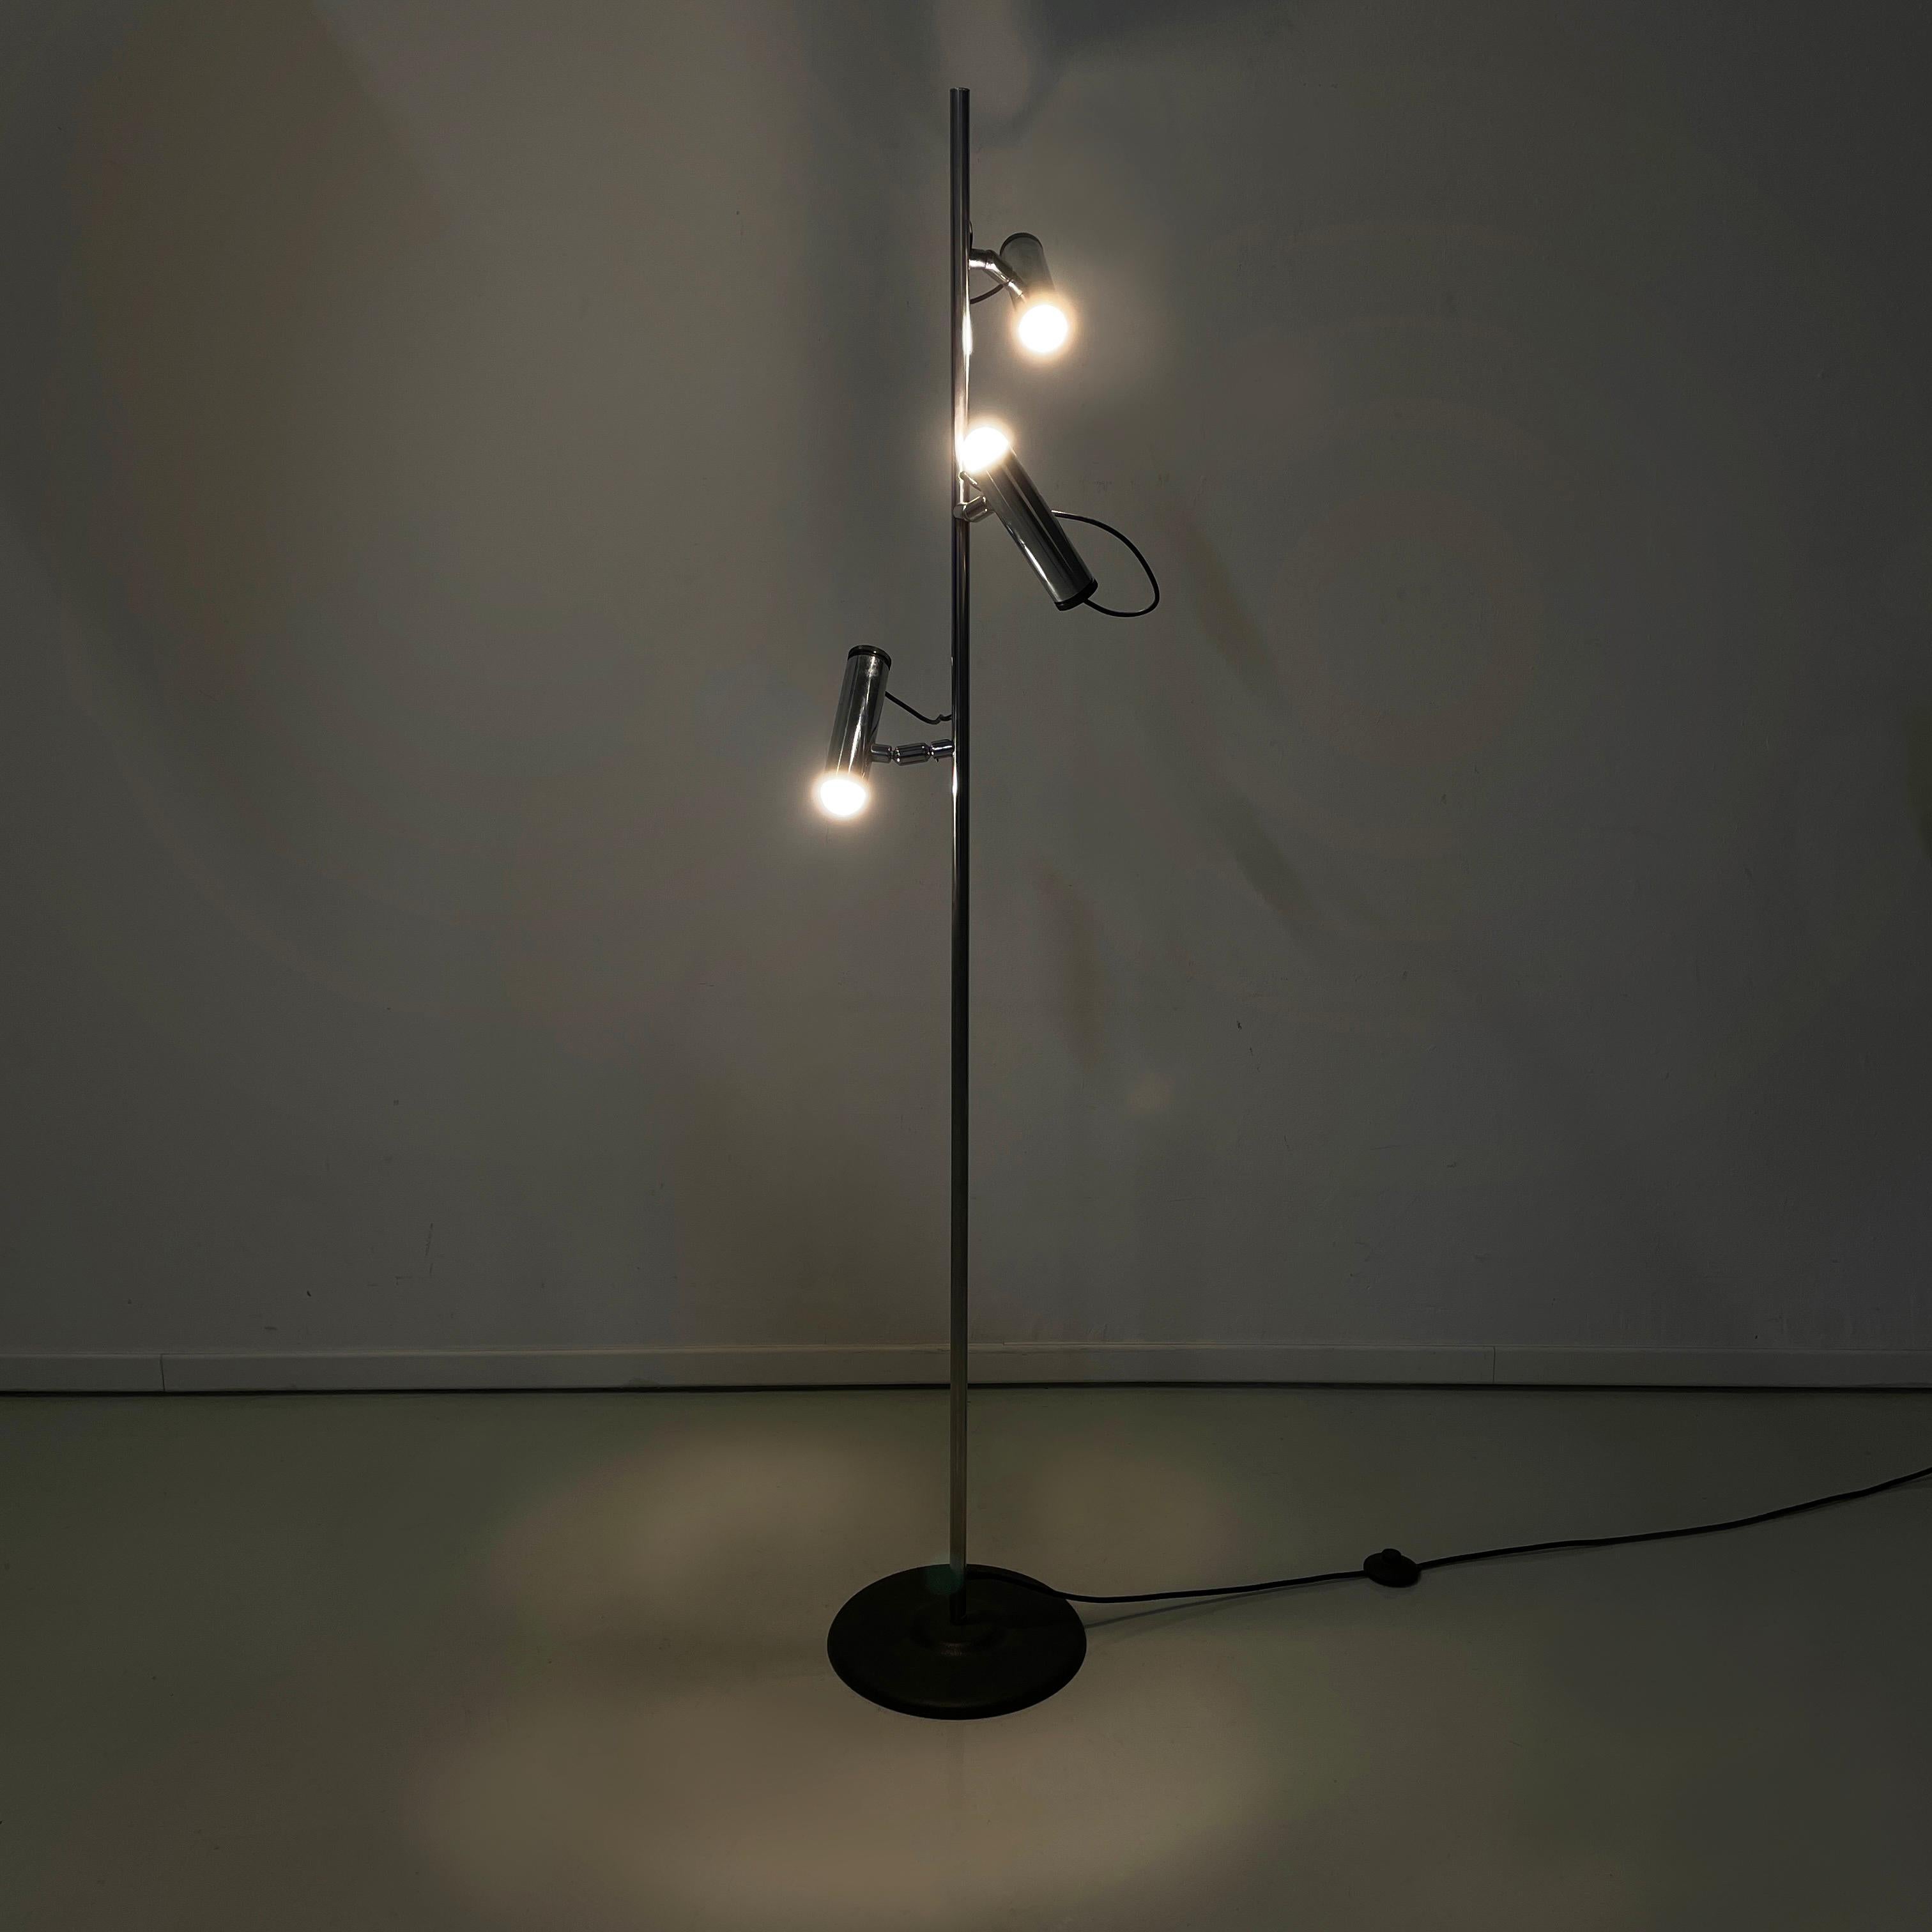 Italian modern Adjustable floor lamp with 3 light in chromed metal and black metal, 1970s
Floor lamp with 3 adjustable lights and a round base in black metal. The central structure is composed of vertical chromed metal rod. The cylindrical